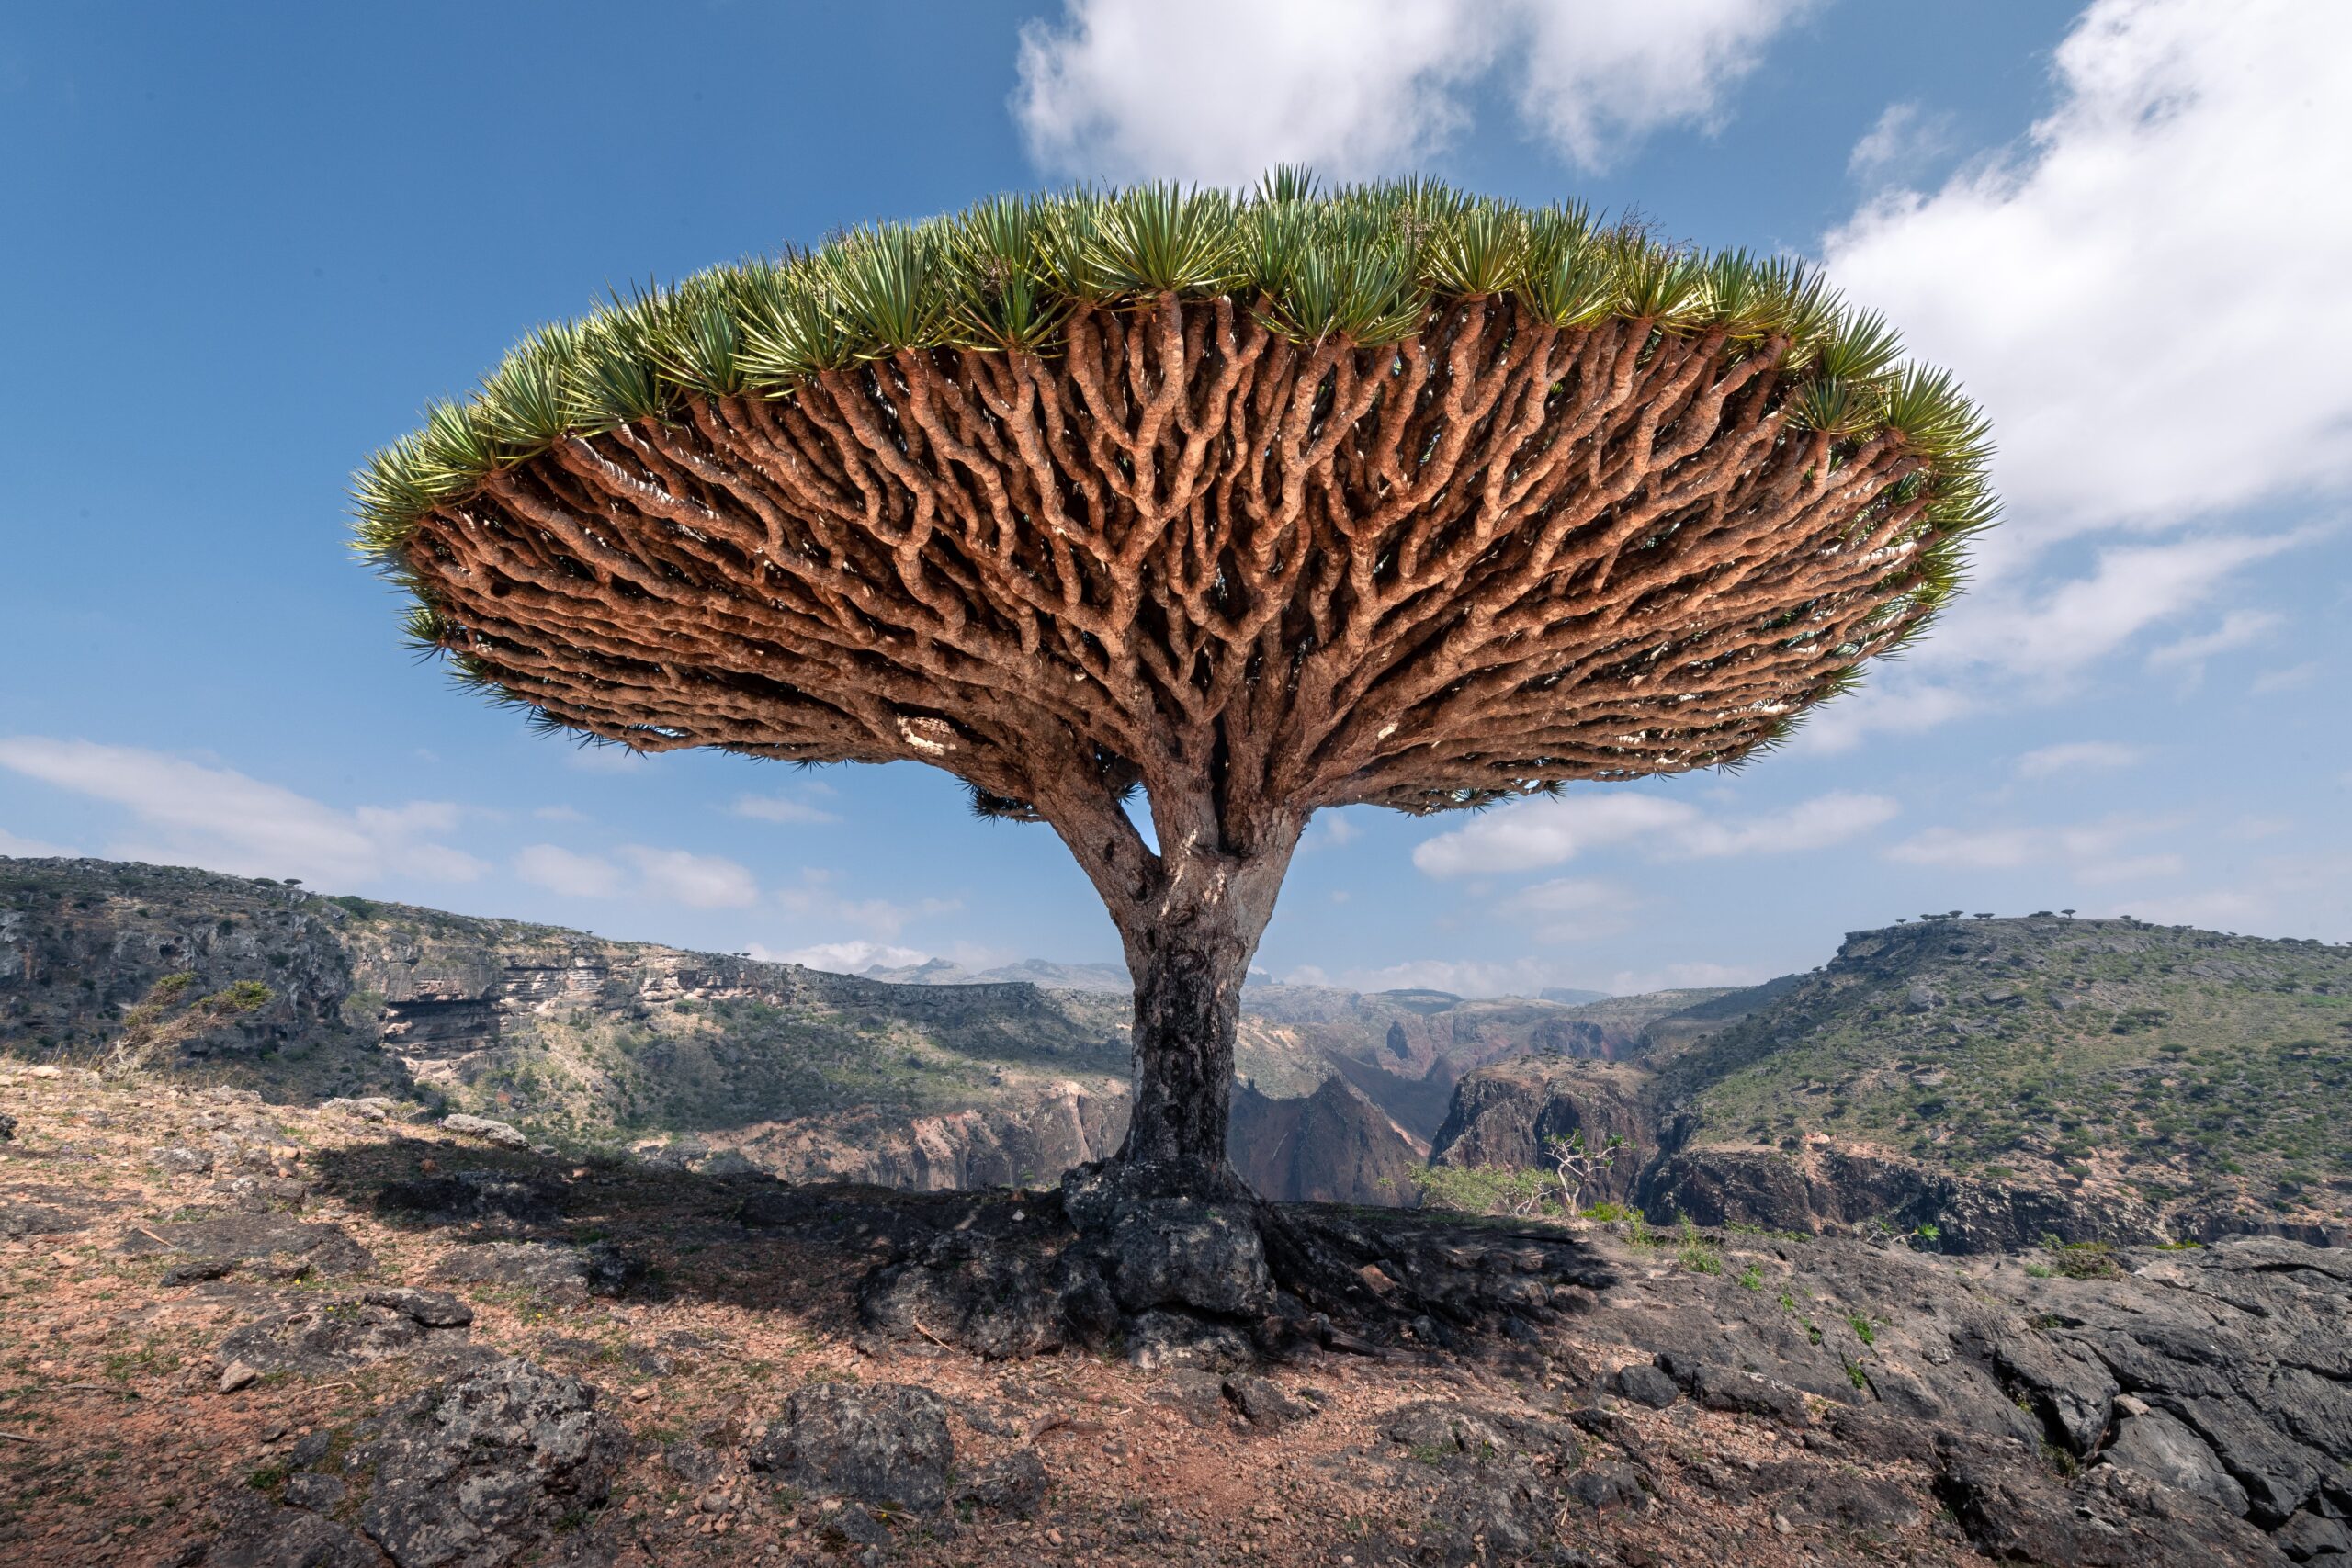 The Dragon Blood tree is native to the Socotra archipelago, part of Yemen, located in the Arabian Sea